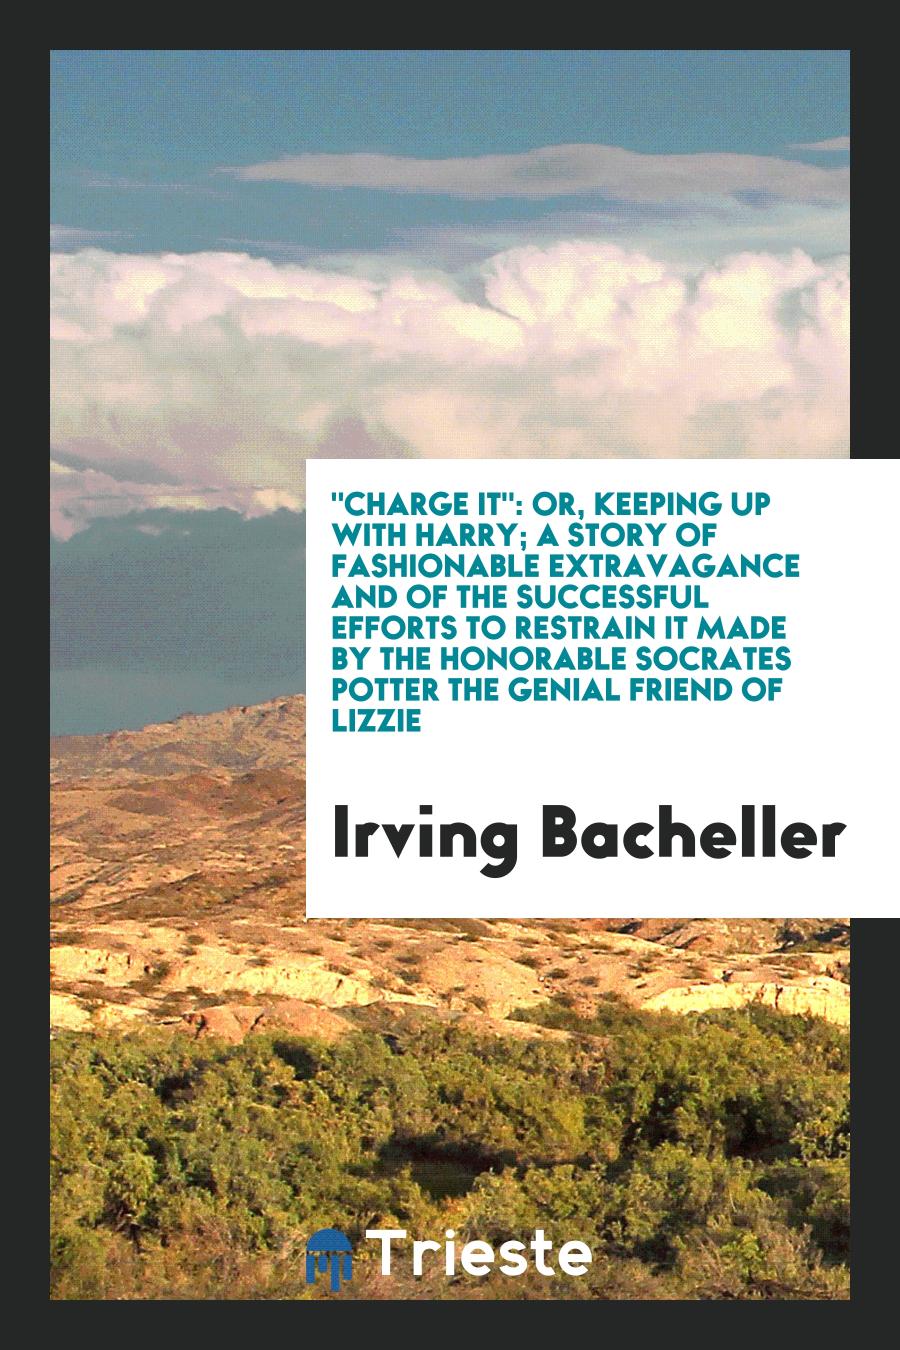 Irving Bacheller - "Charge It": Or, Keeping up with Harry; A Story of Fashionable Extravagance and of the Successful Efforts to Restrain It Made by the Honorable Socrates Potter the Genial Friend of Lizzie